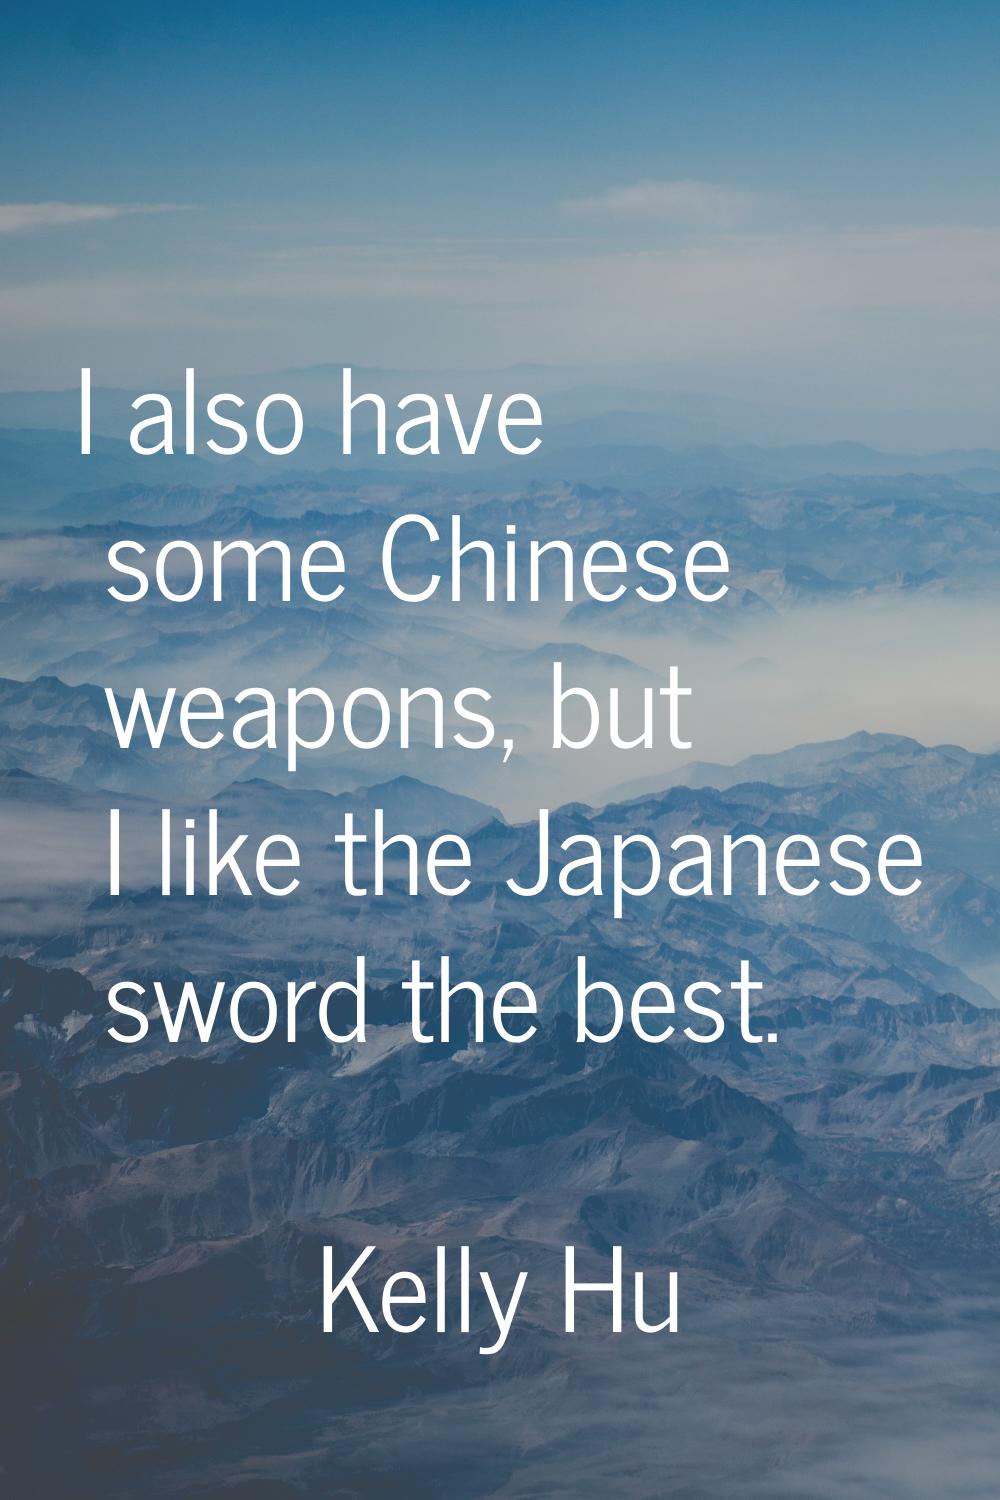 I also have some Chinese weapons, but I like the Japanese sword the best.